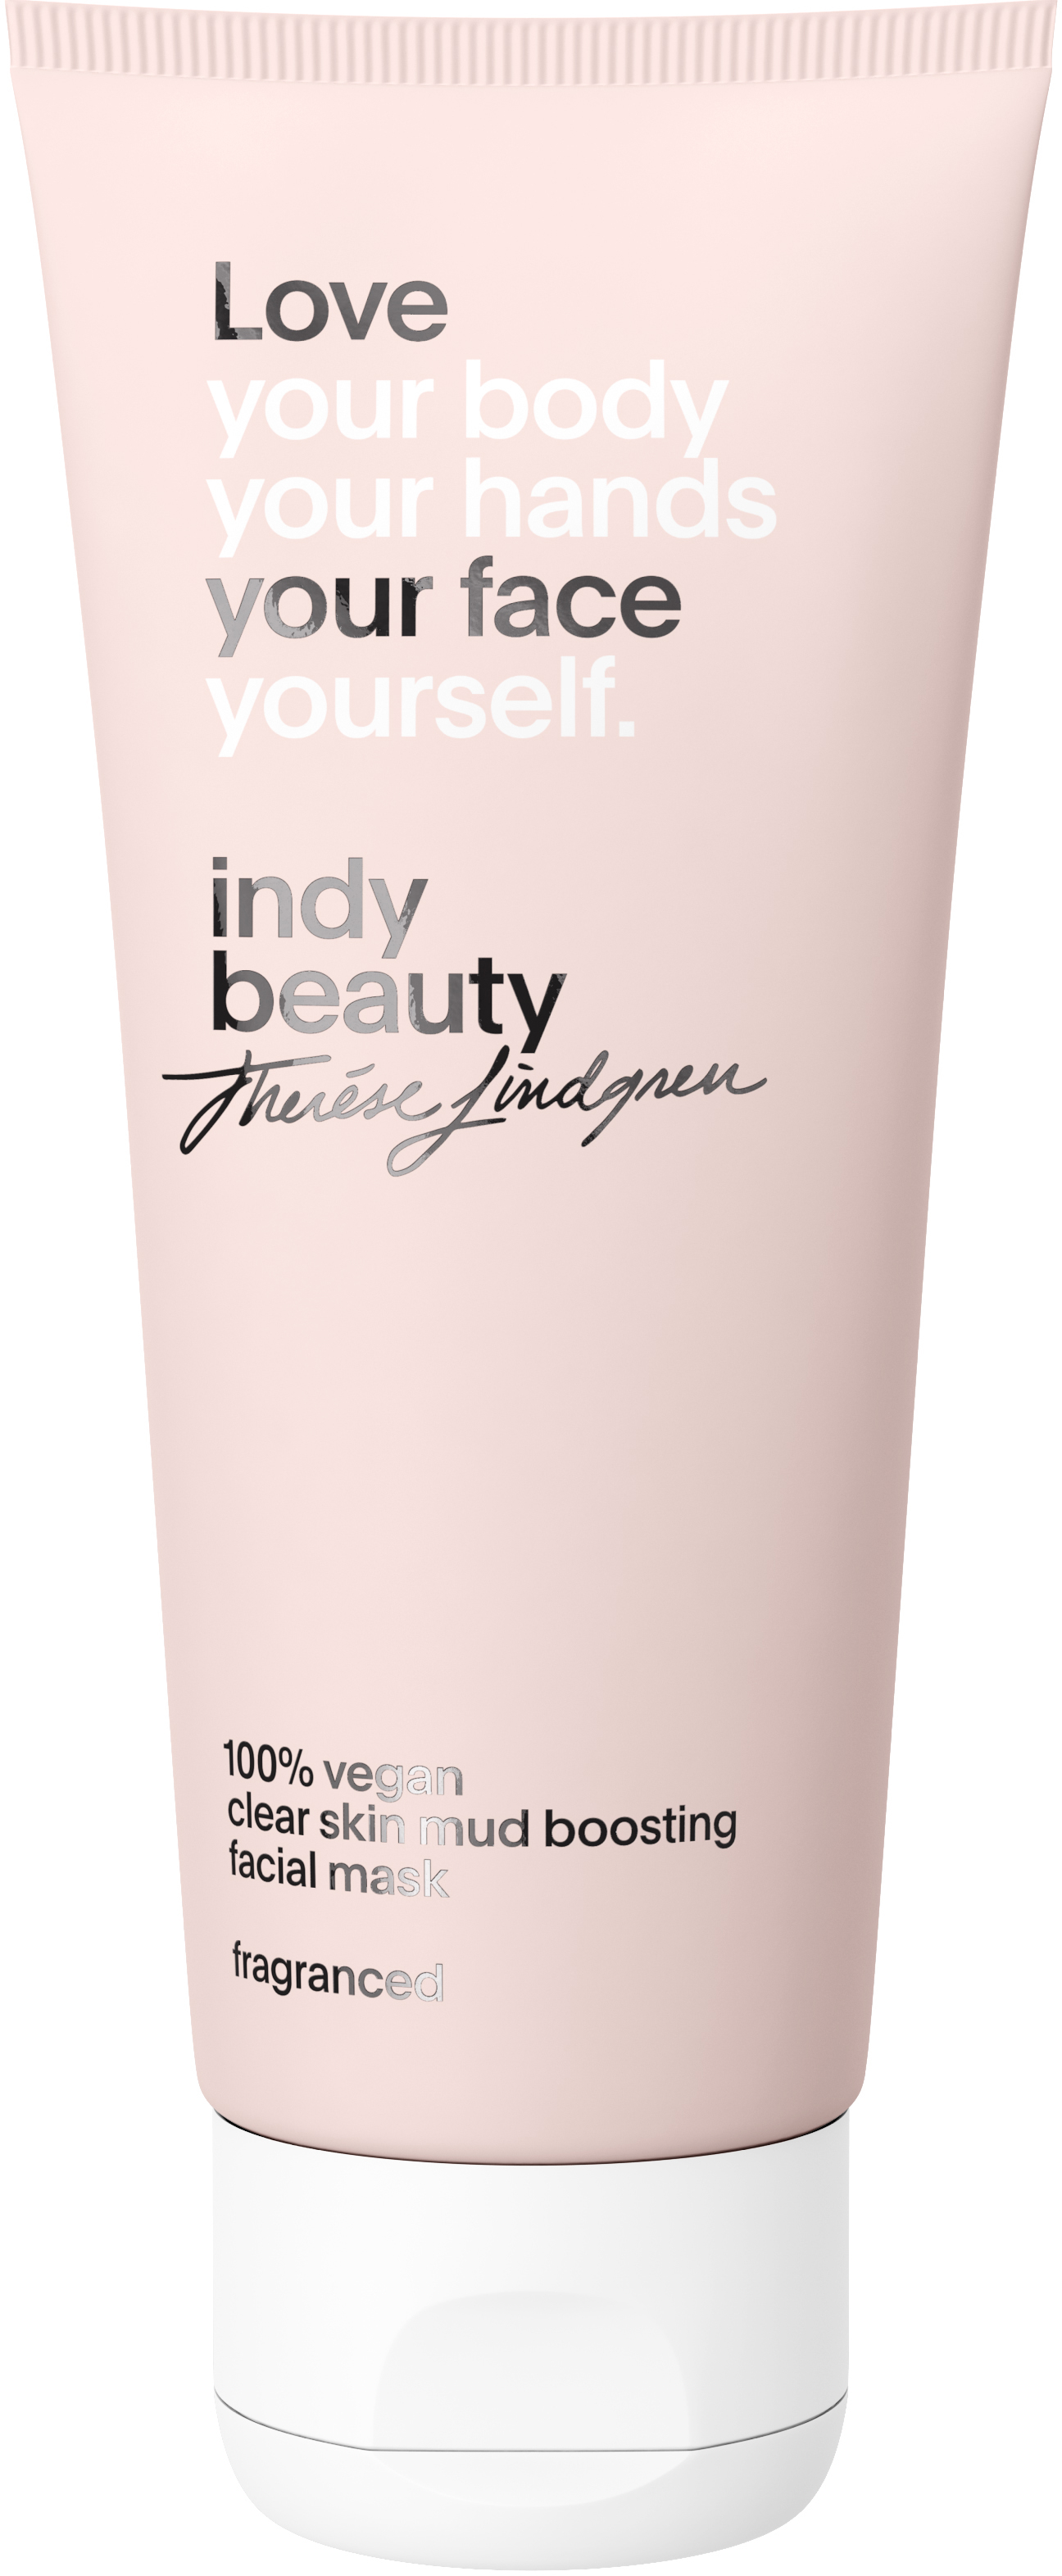 Indy Beauty Clear Skin Mud Boosting Facial Mask Parf 100ml